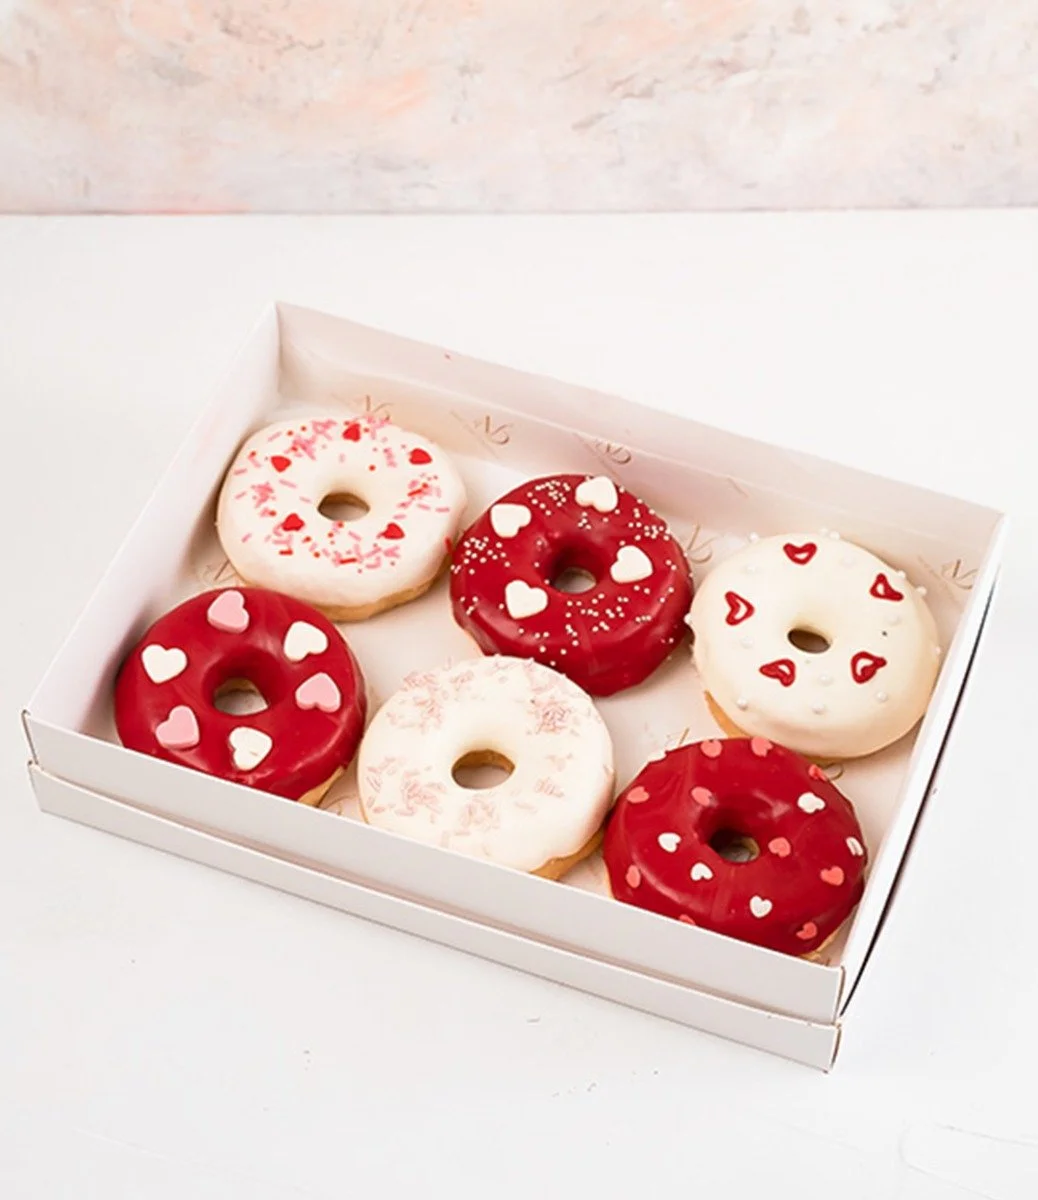 Red and White Donuts by NJD